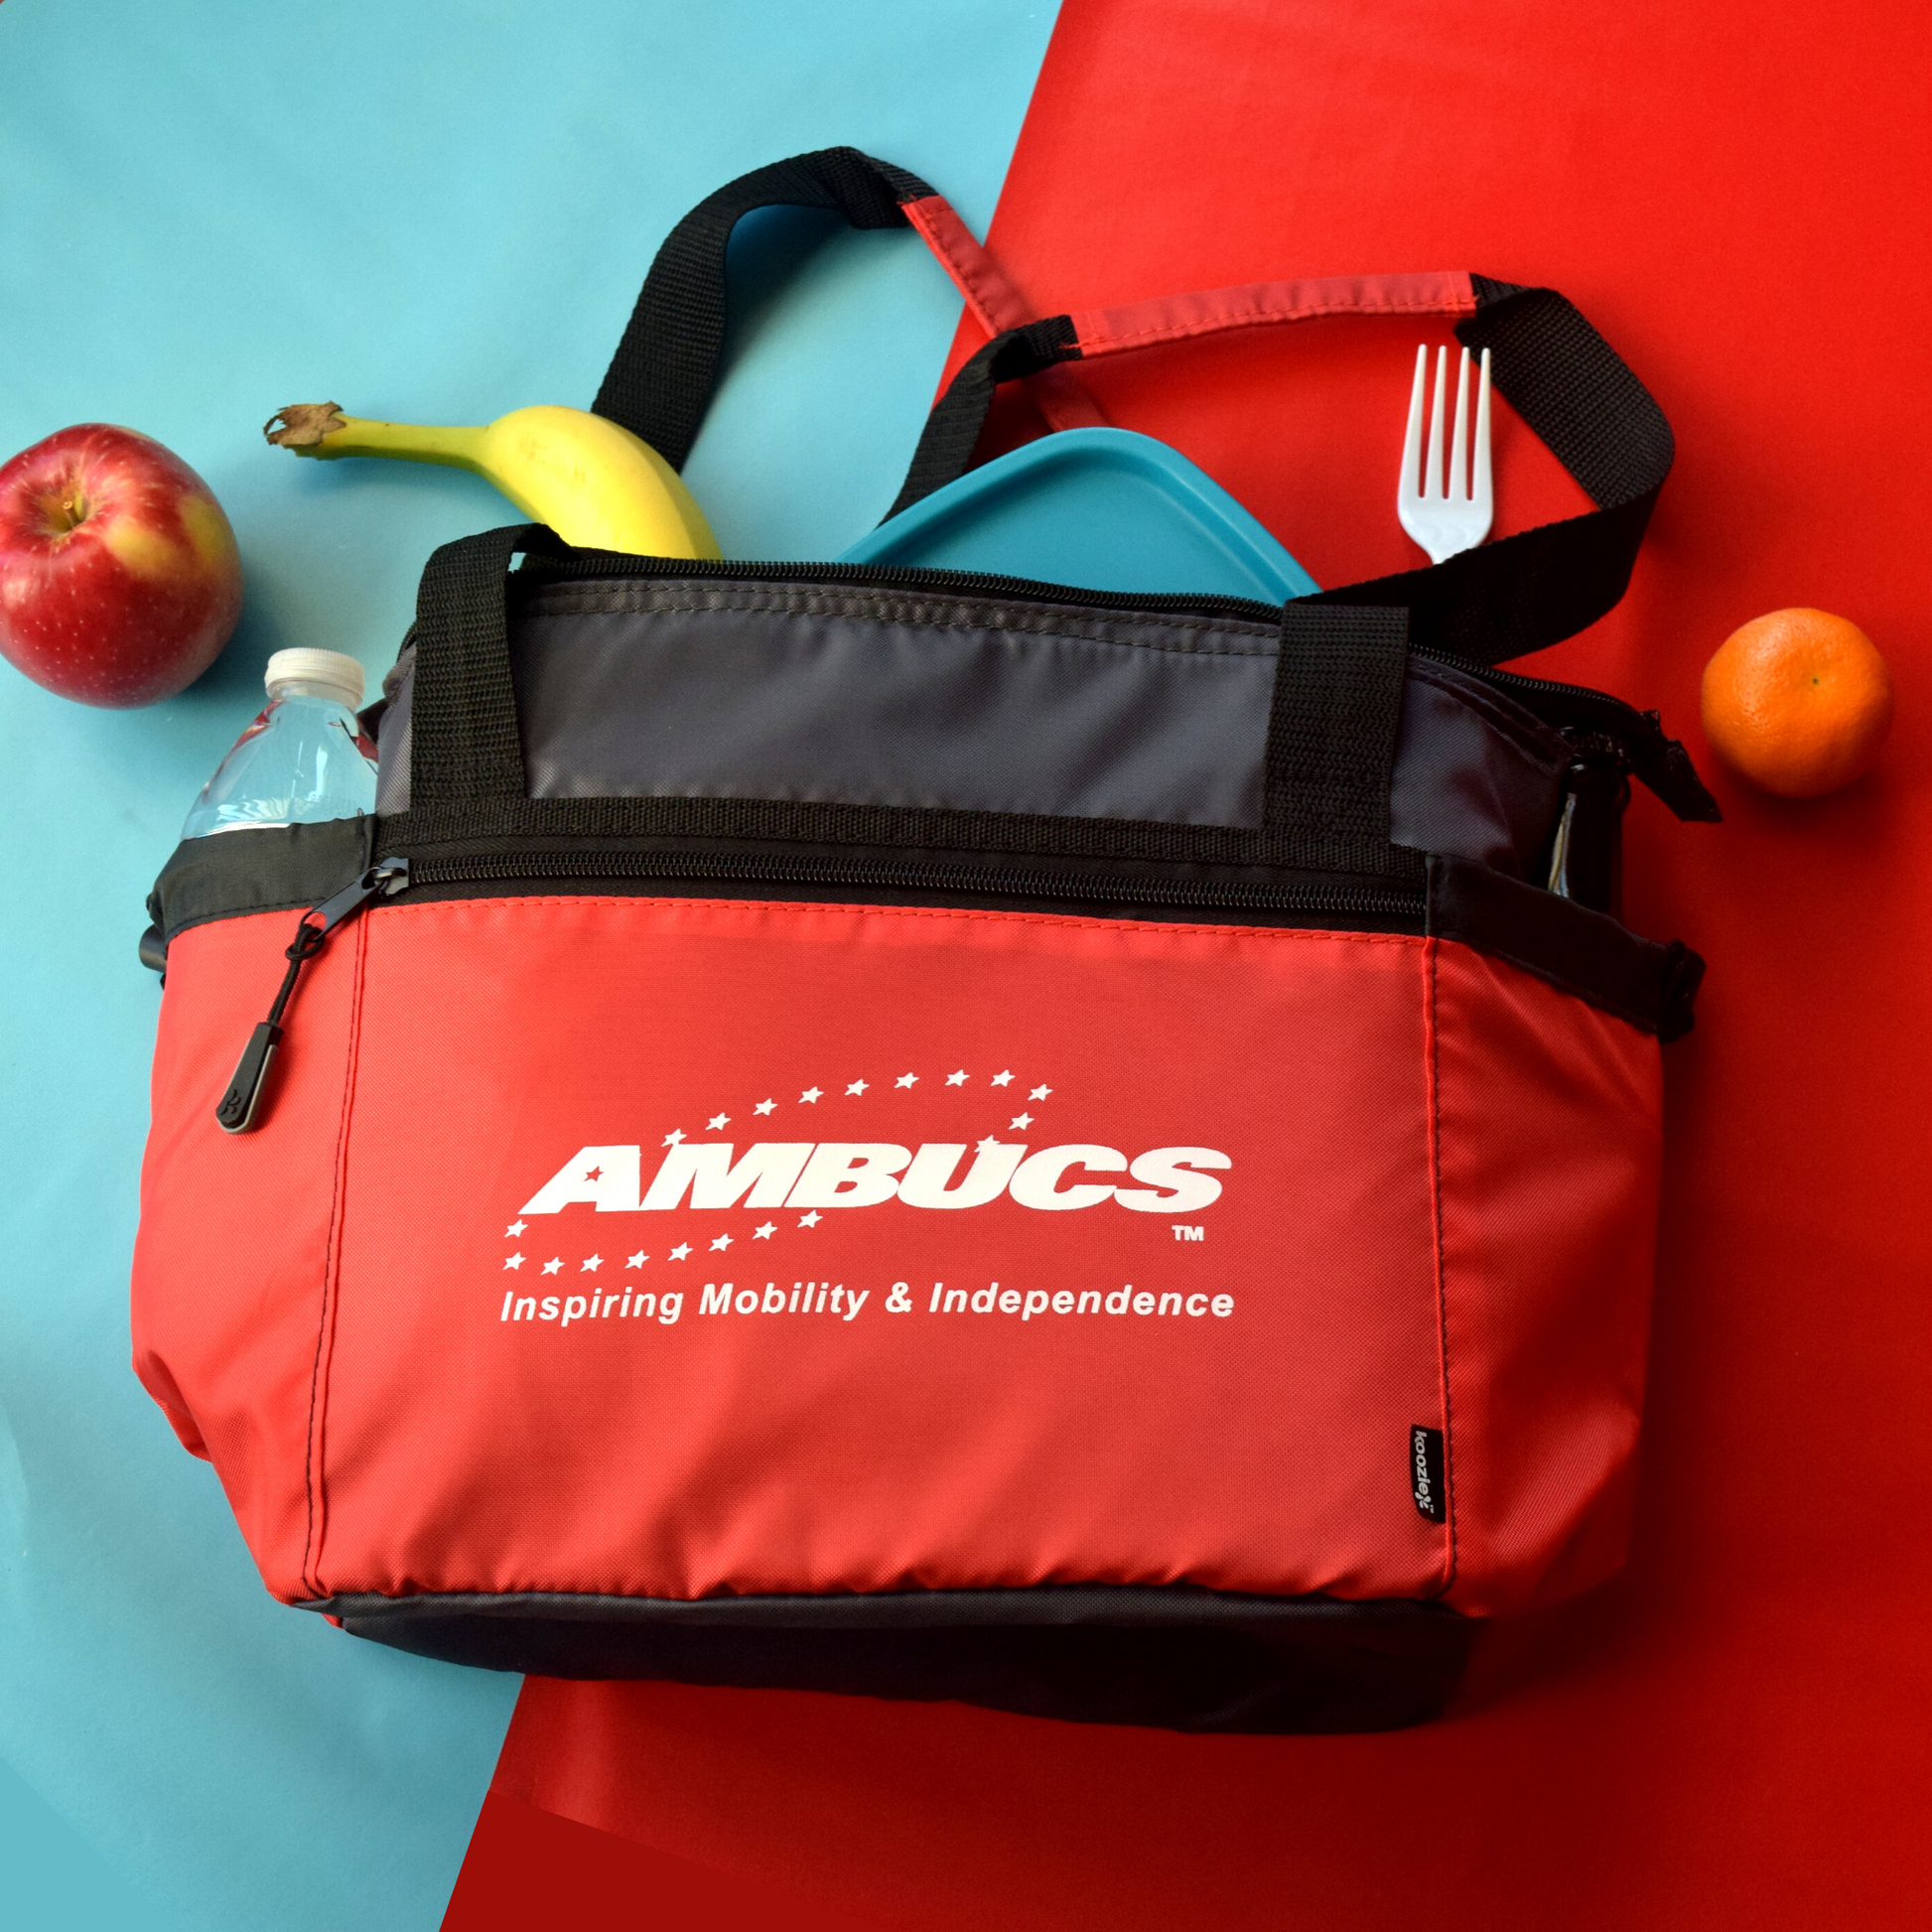 Red insulated zipper cooler bag with black handles.  Printed on the front is the AMBUCS logo in white and the words inspiring mobility and independence in white lettering